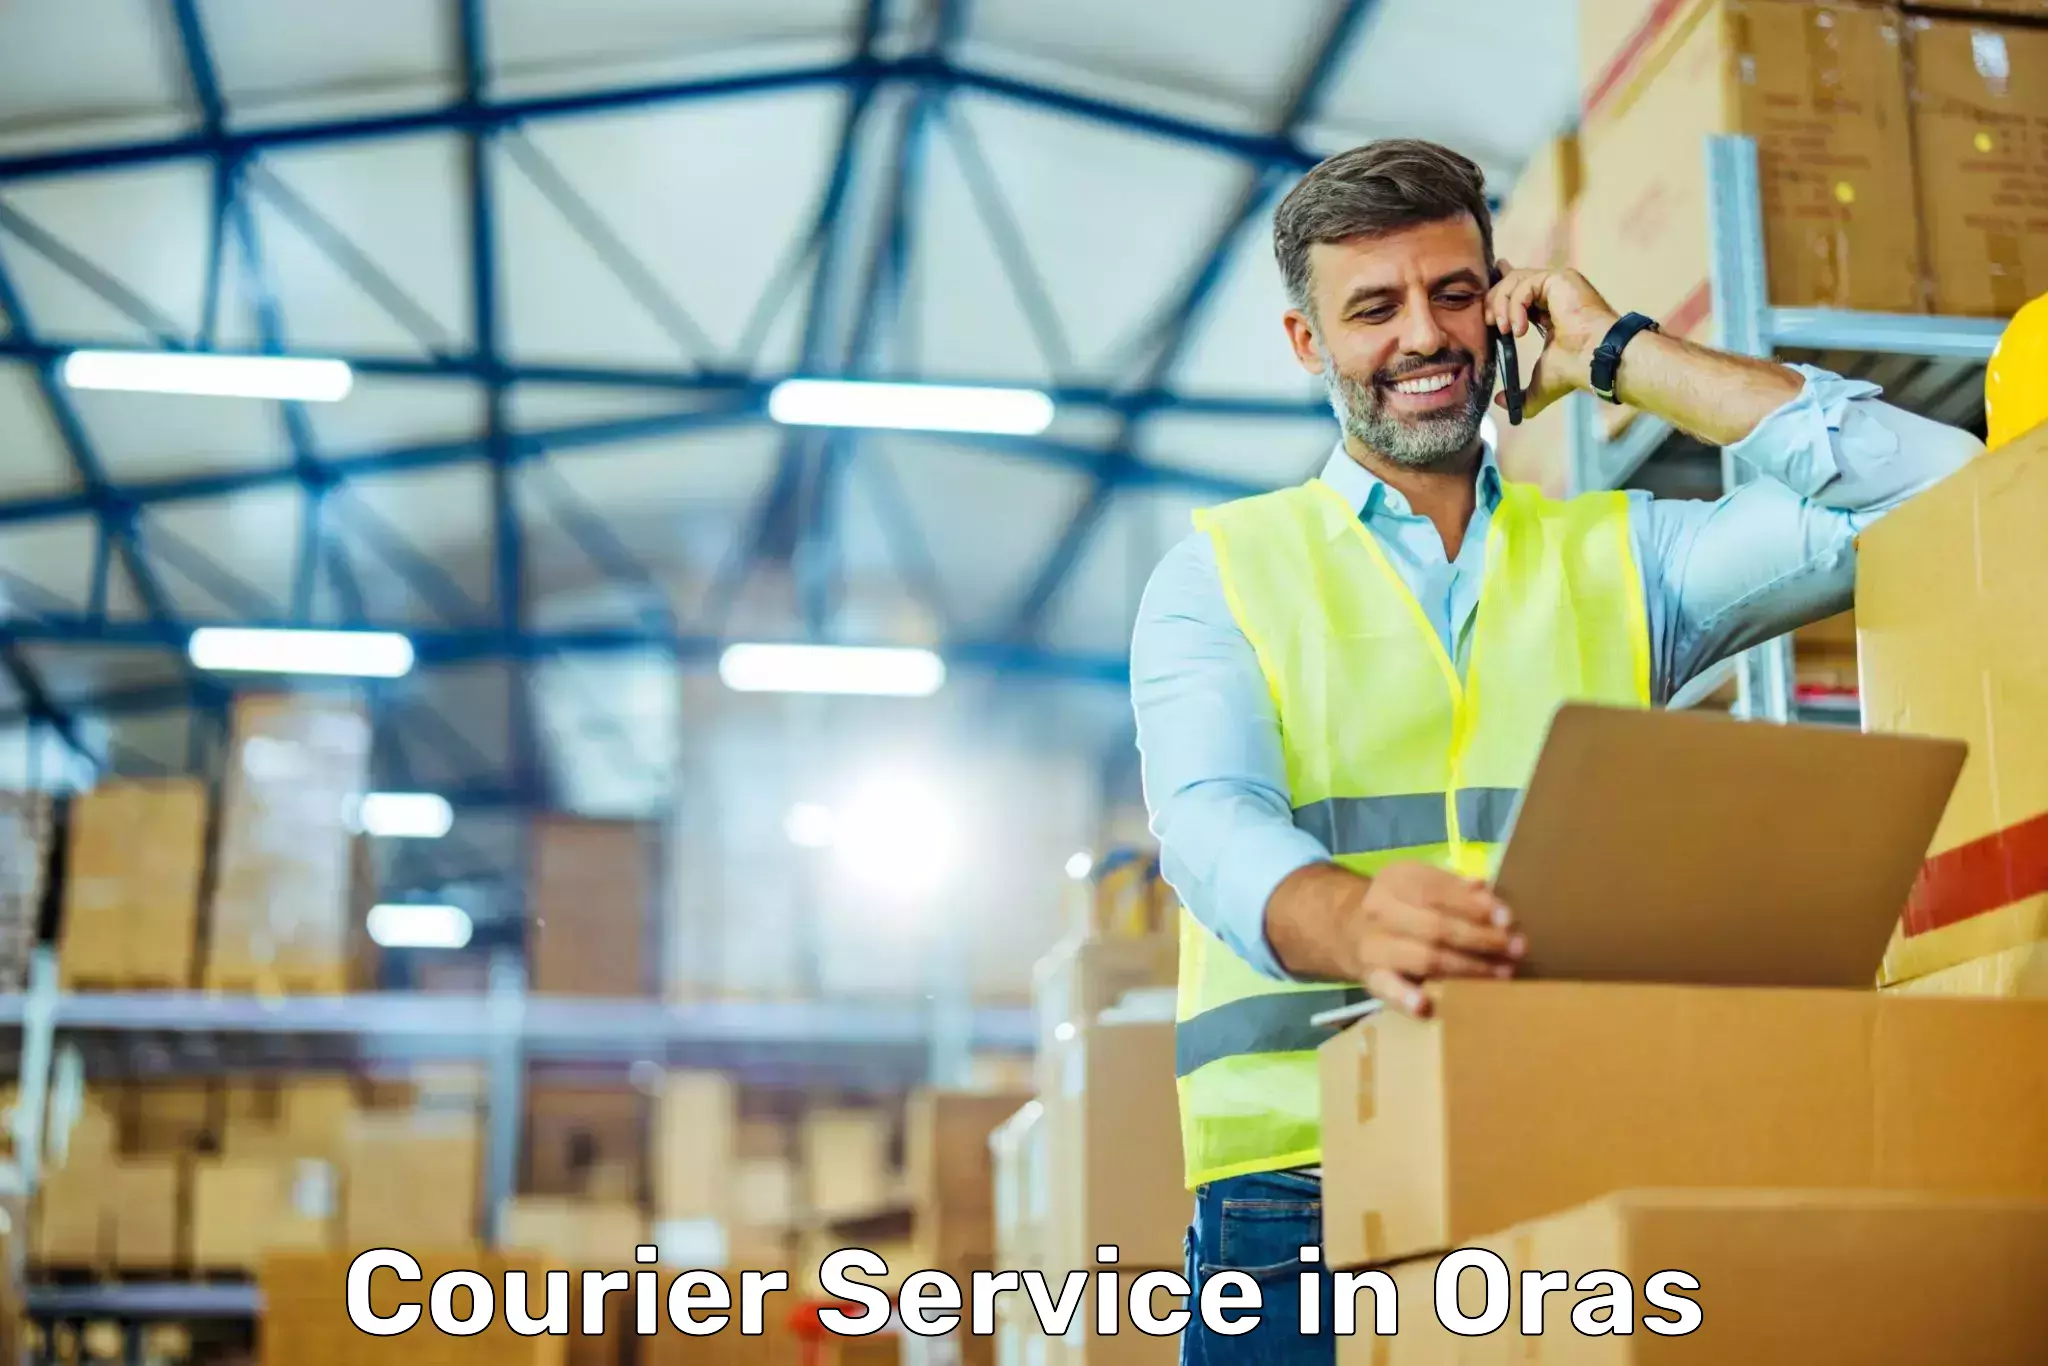 Customer-focused courier in Oras